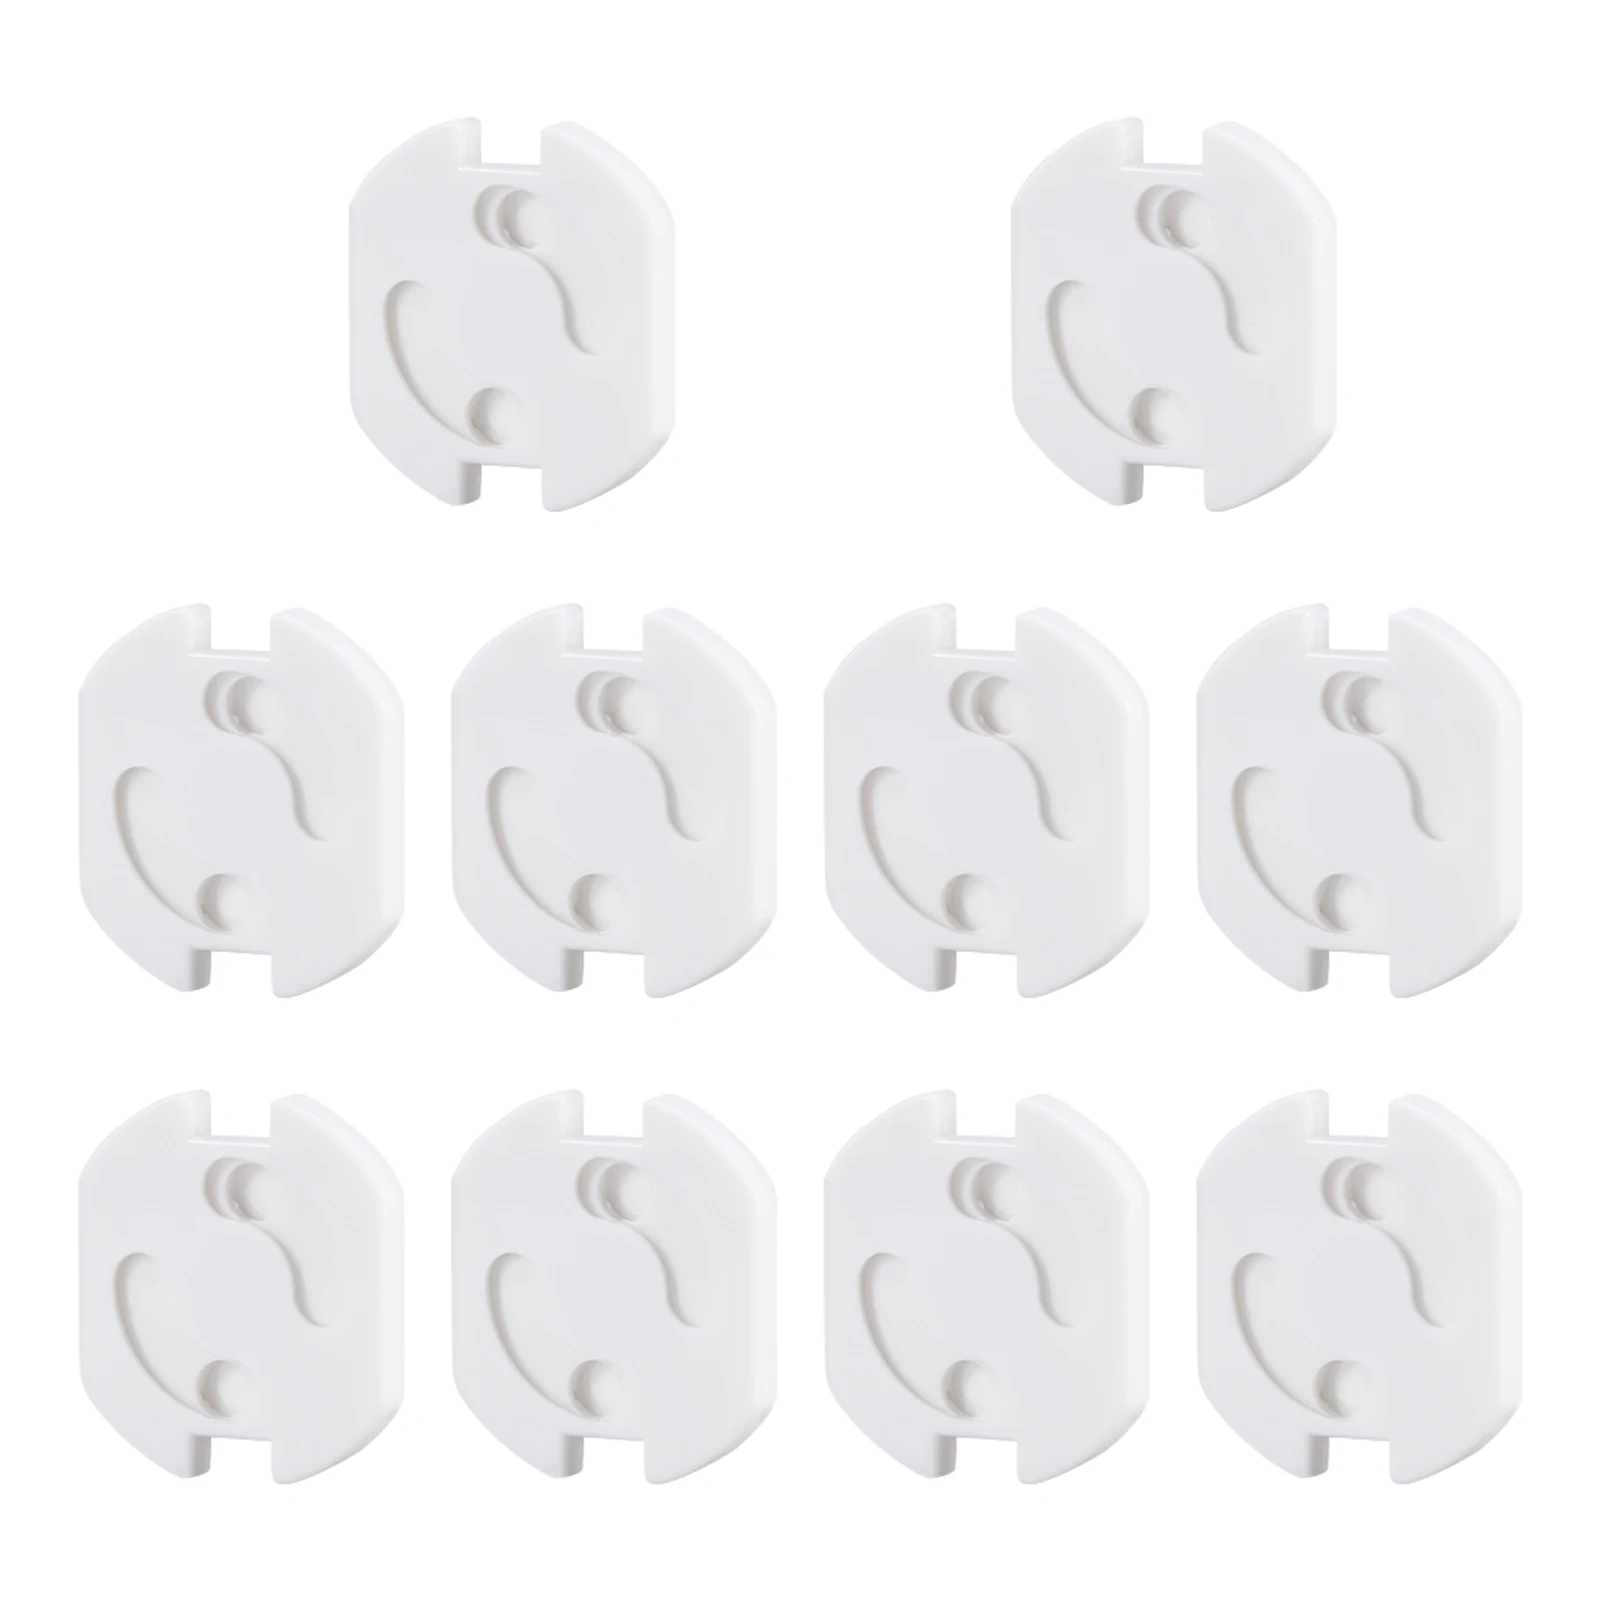 10pcs Socket Child Lock Daily Electrical Equipment Safe Baby Proofing European Standard Nursery Practical 2 Pins Hotel Home